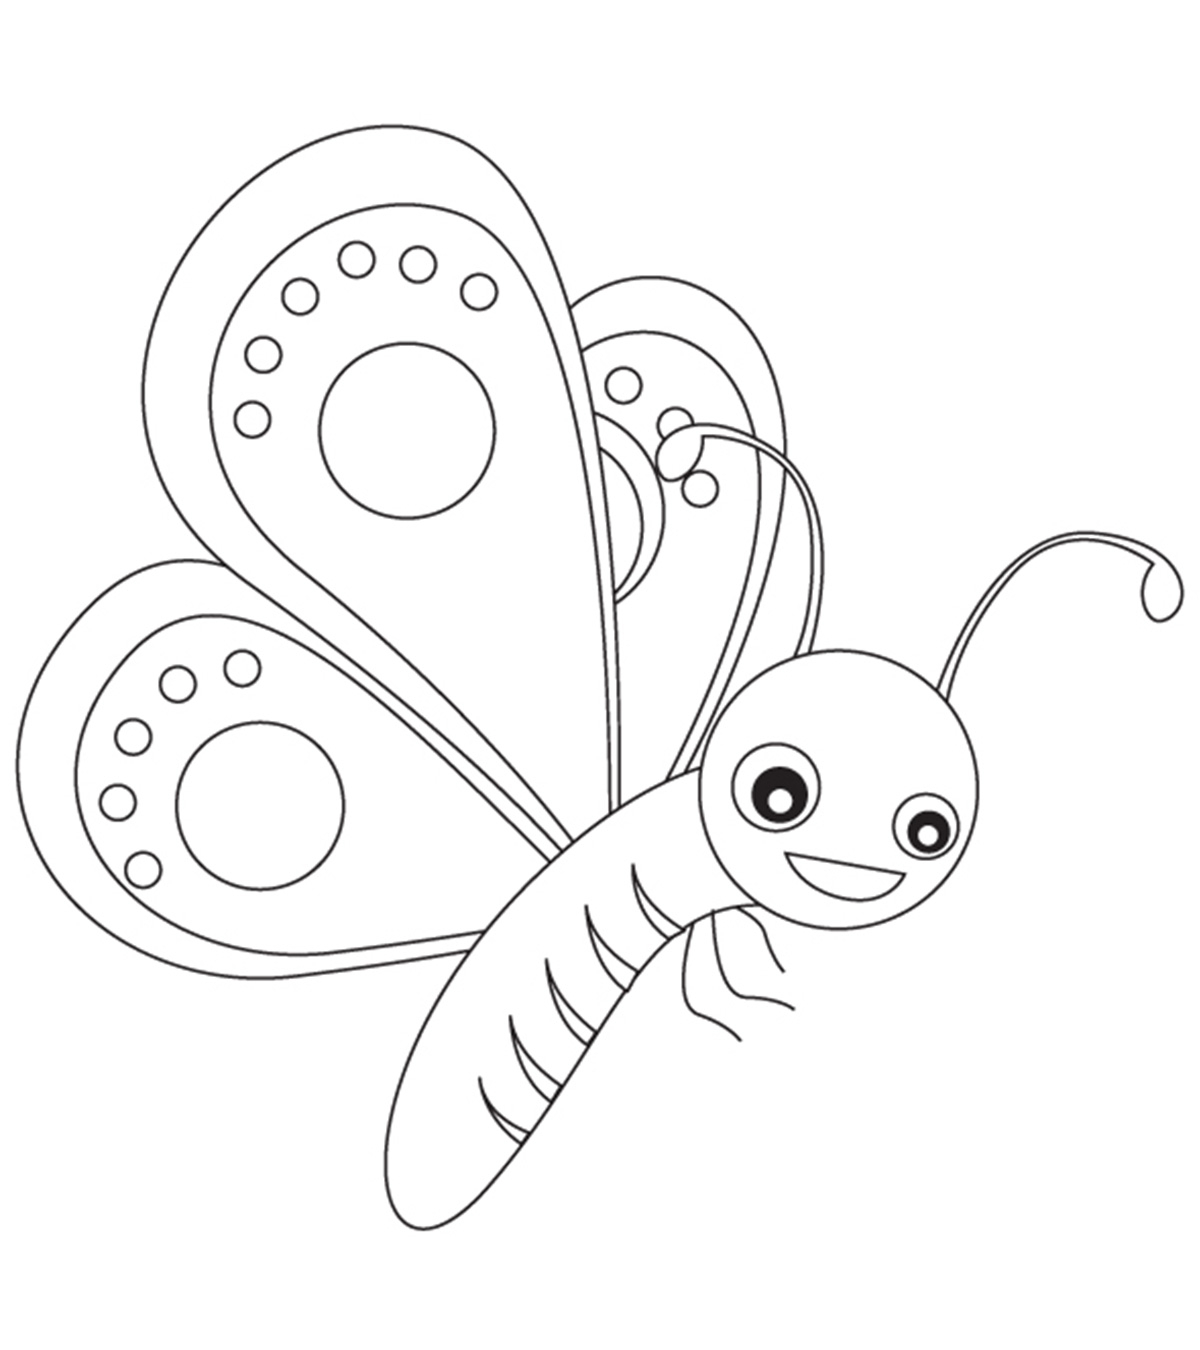 Printable Butterfly Coloring Pages Top 50 Free Printable Butterfly Coloring Pages Online